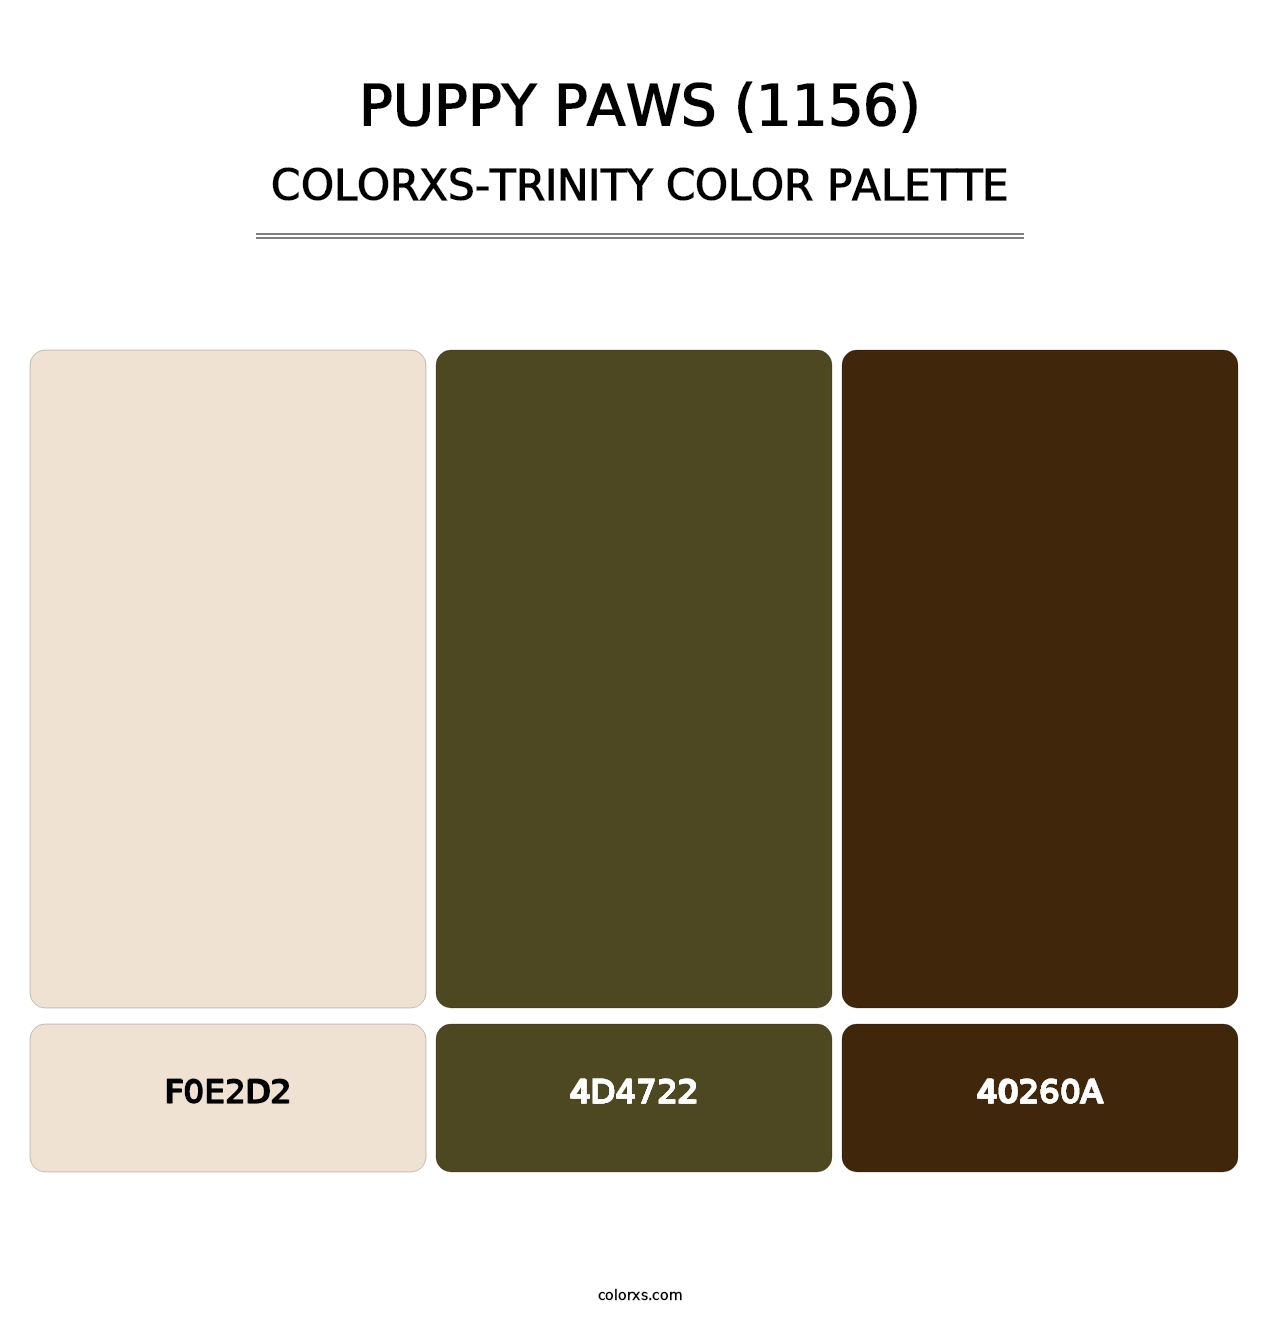 Puppy Paws (1156) - Colorxs Trinity Palette